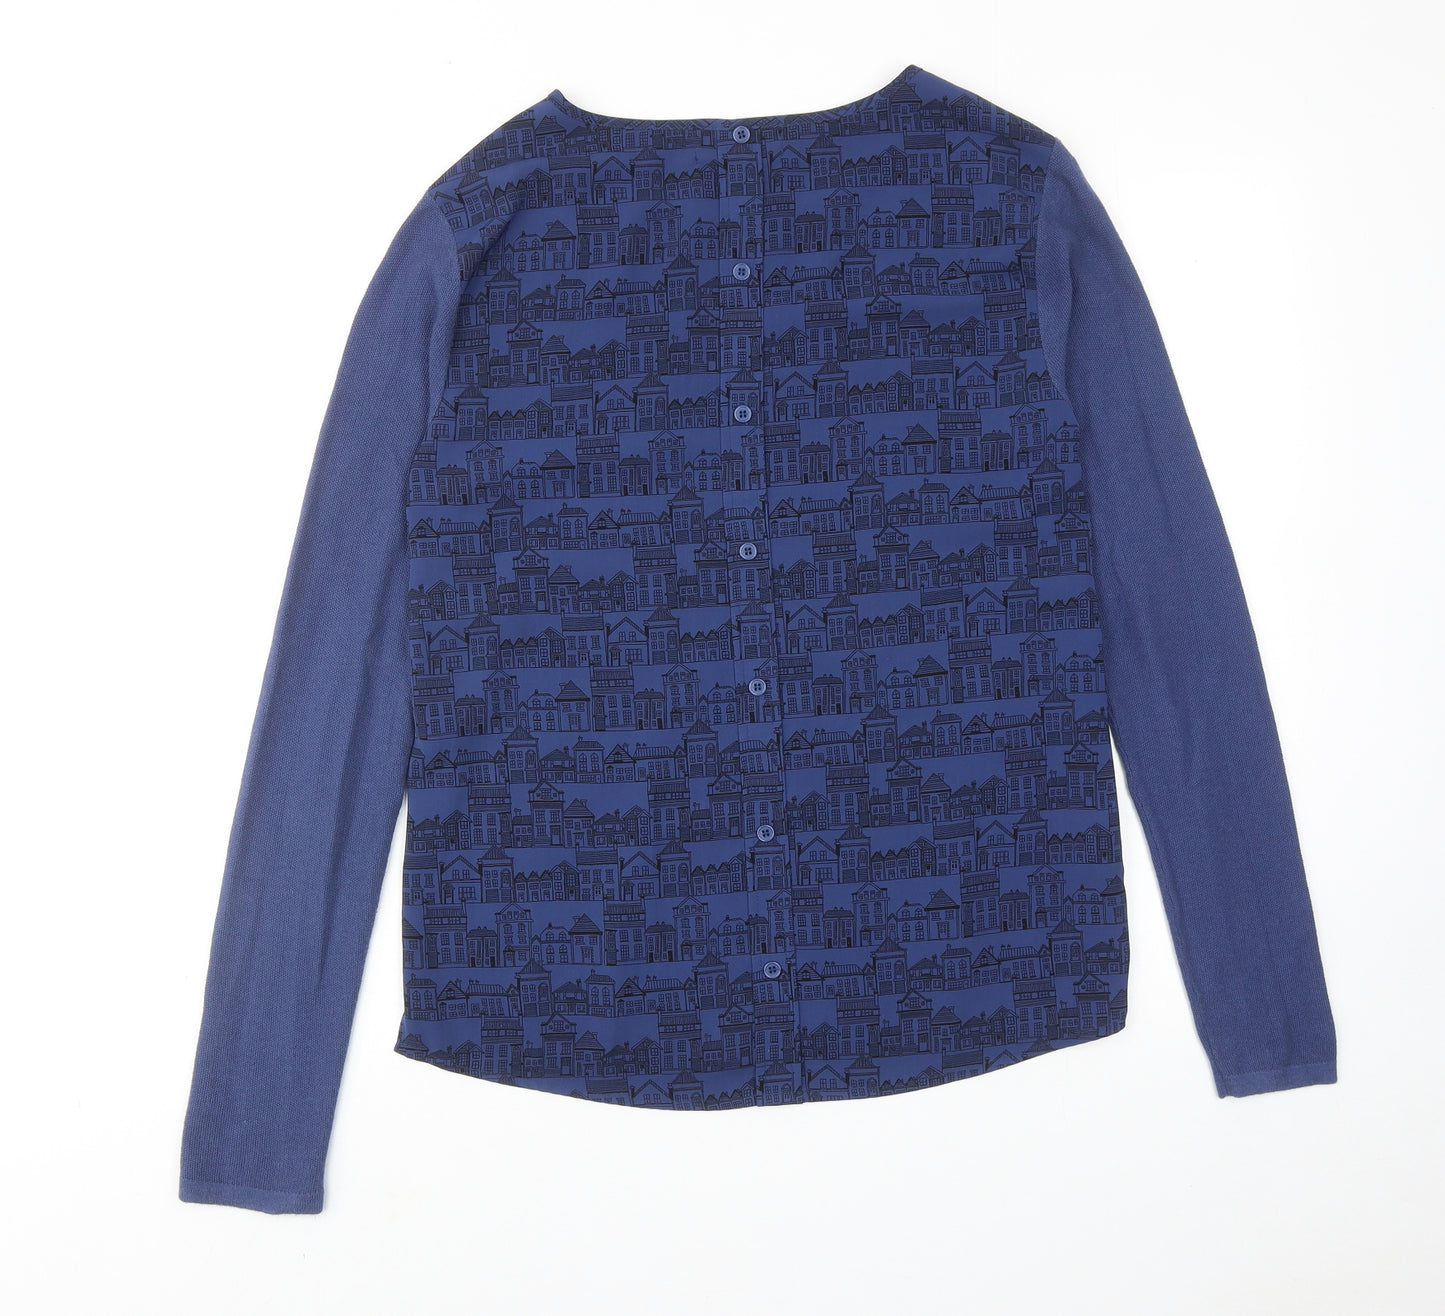 NEXT Womens Blue Round Neck Cotton Pullover Jumper Size 10 - Town House Print